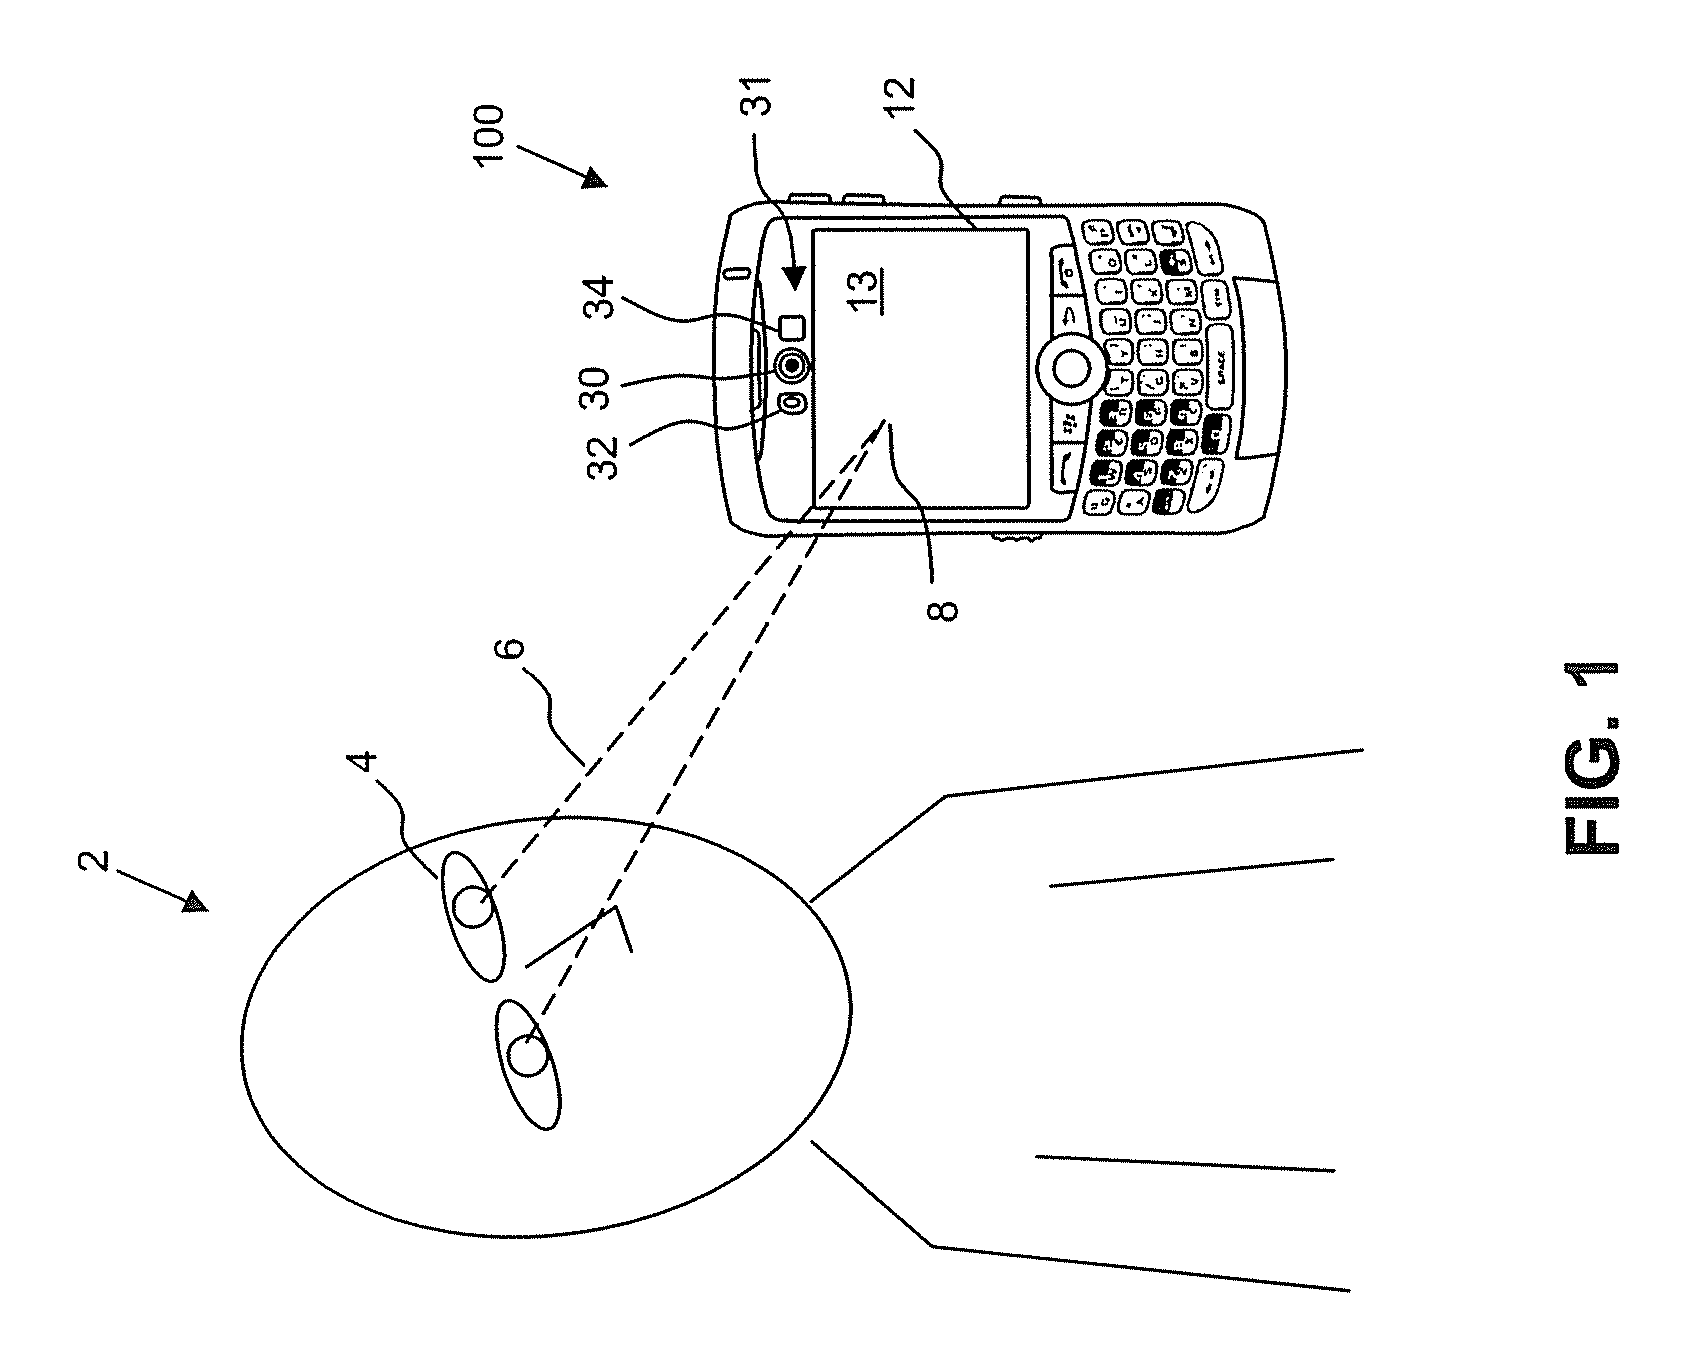 System and method for controlling a display of a mobile device